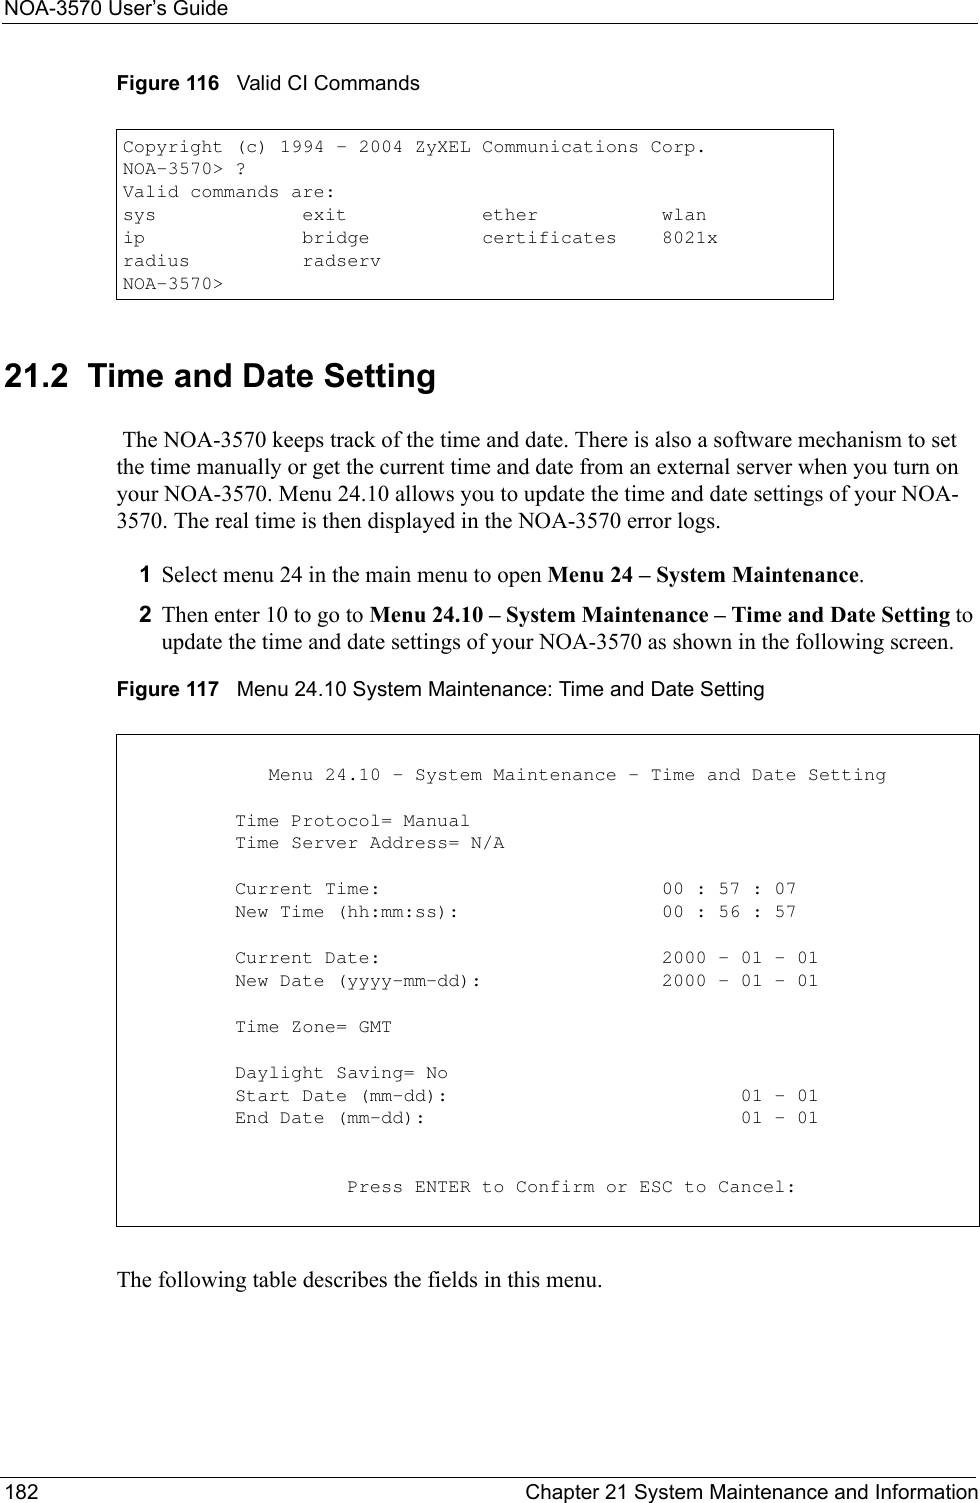 NOA-3570 User’s Guide182 Chapter 21 System Maintenance and InformationFigure 116   Valid CI Commands21.2  Time and Date Setting The NOA-3570 keeps track of the time and date. There is also a software mechanism to set the time manually or get the current time and date from an external server when you turn on your NOA-3570. Menu 24.10 allows you to update the time and date settings of your NOA-3570. The real time is then displayed in the NOA-3570 error logs. 1Select menu 24 in the main menu to open Menu 24 – System Maintenance.  2Then enter 10 to go to Menu 24.10 – System Maintenance – Time and Date Setting to update the time and date settings of your NOA-3570 as shown in the following screen.Figure 117   Menu 24.10 System Maintenance: Time and Date SettingThe following table describes the fields in this menu.Copyright (c) 1994 - 2004 ZyXEL Communications Corp.NOA-3570&gt; ?Valid commands are:sys             exit            ether           wlanip              bridge          certificates    8021xradius          radservNOA-3570&gt;                   Menu 24.10 - System Maintenance - Time and Date Setting          Time Protocol= Manual          Time Server Address= N/A          Current Time:                         00 : 57 : 07          New Time (hh:mm:ss):                  00 : 56 : 57          Current Date:                         2000 - 01 - 01          New Date (yyyy-mm-dd):                2000 - 01 - 01          Time Zone= GMT          Daylight Saving= No          Start Date (mm-dd):                          01 - 01          End Date (mm-dd):                            01 - 01                    Press ENTER to Confirm or ESC to Cancel: